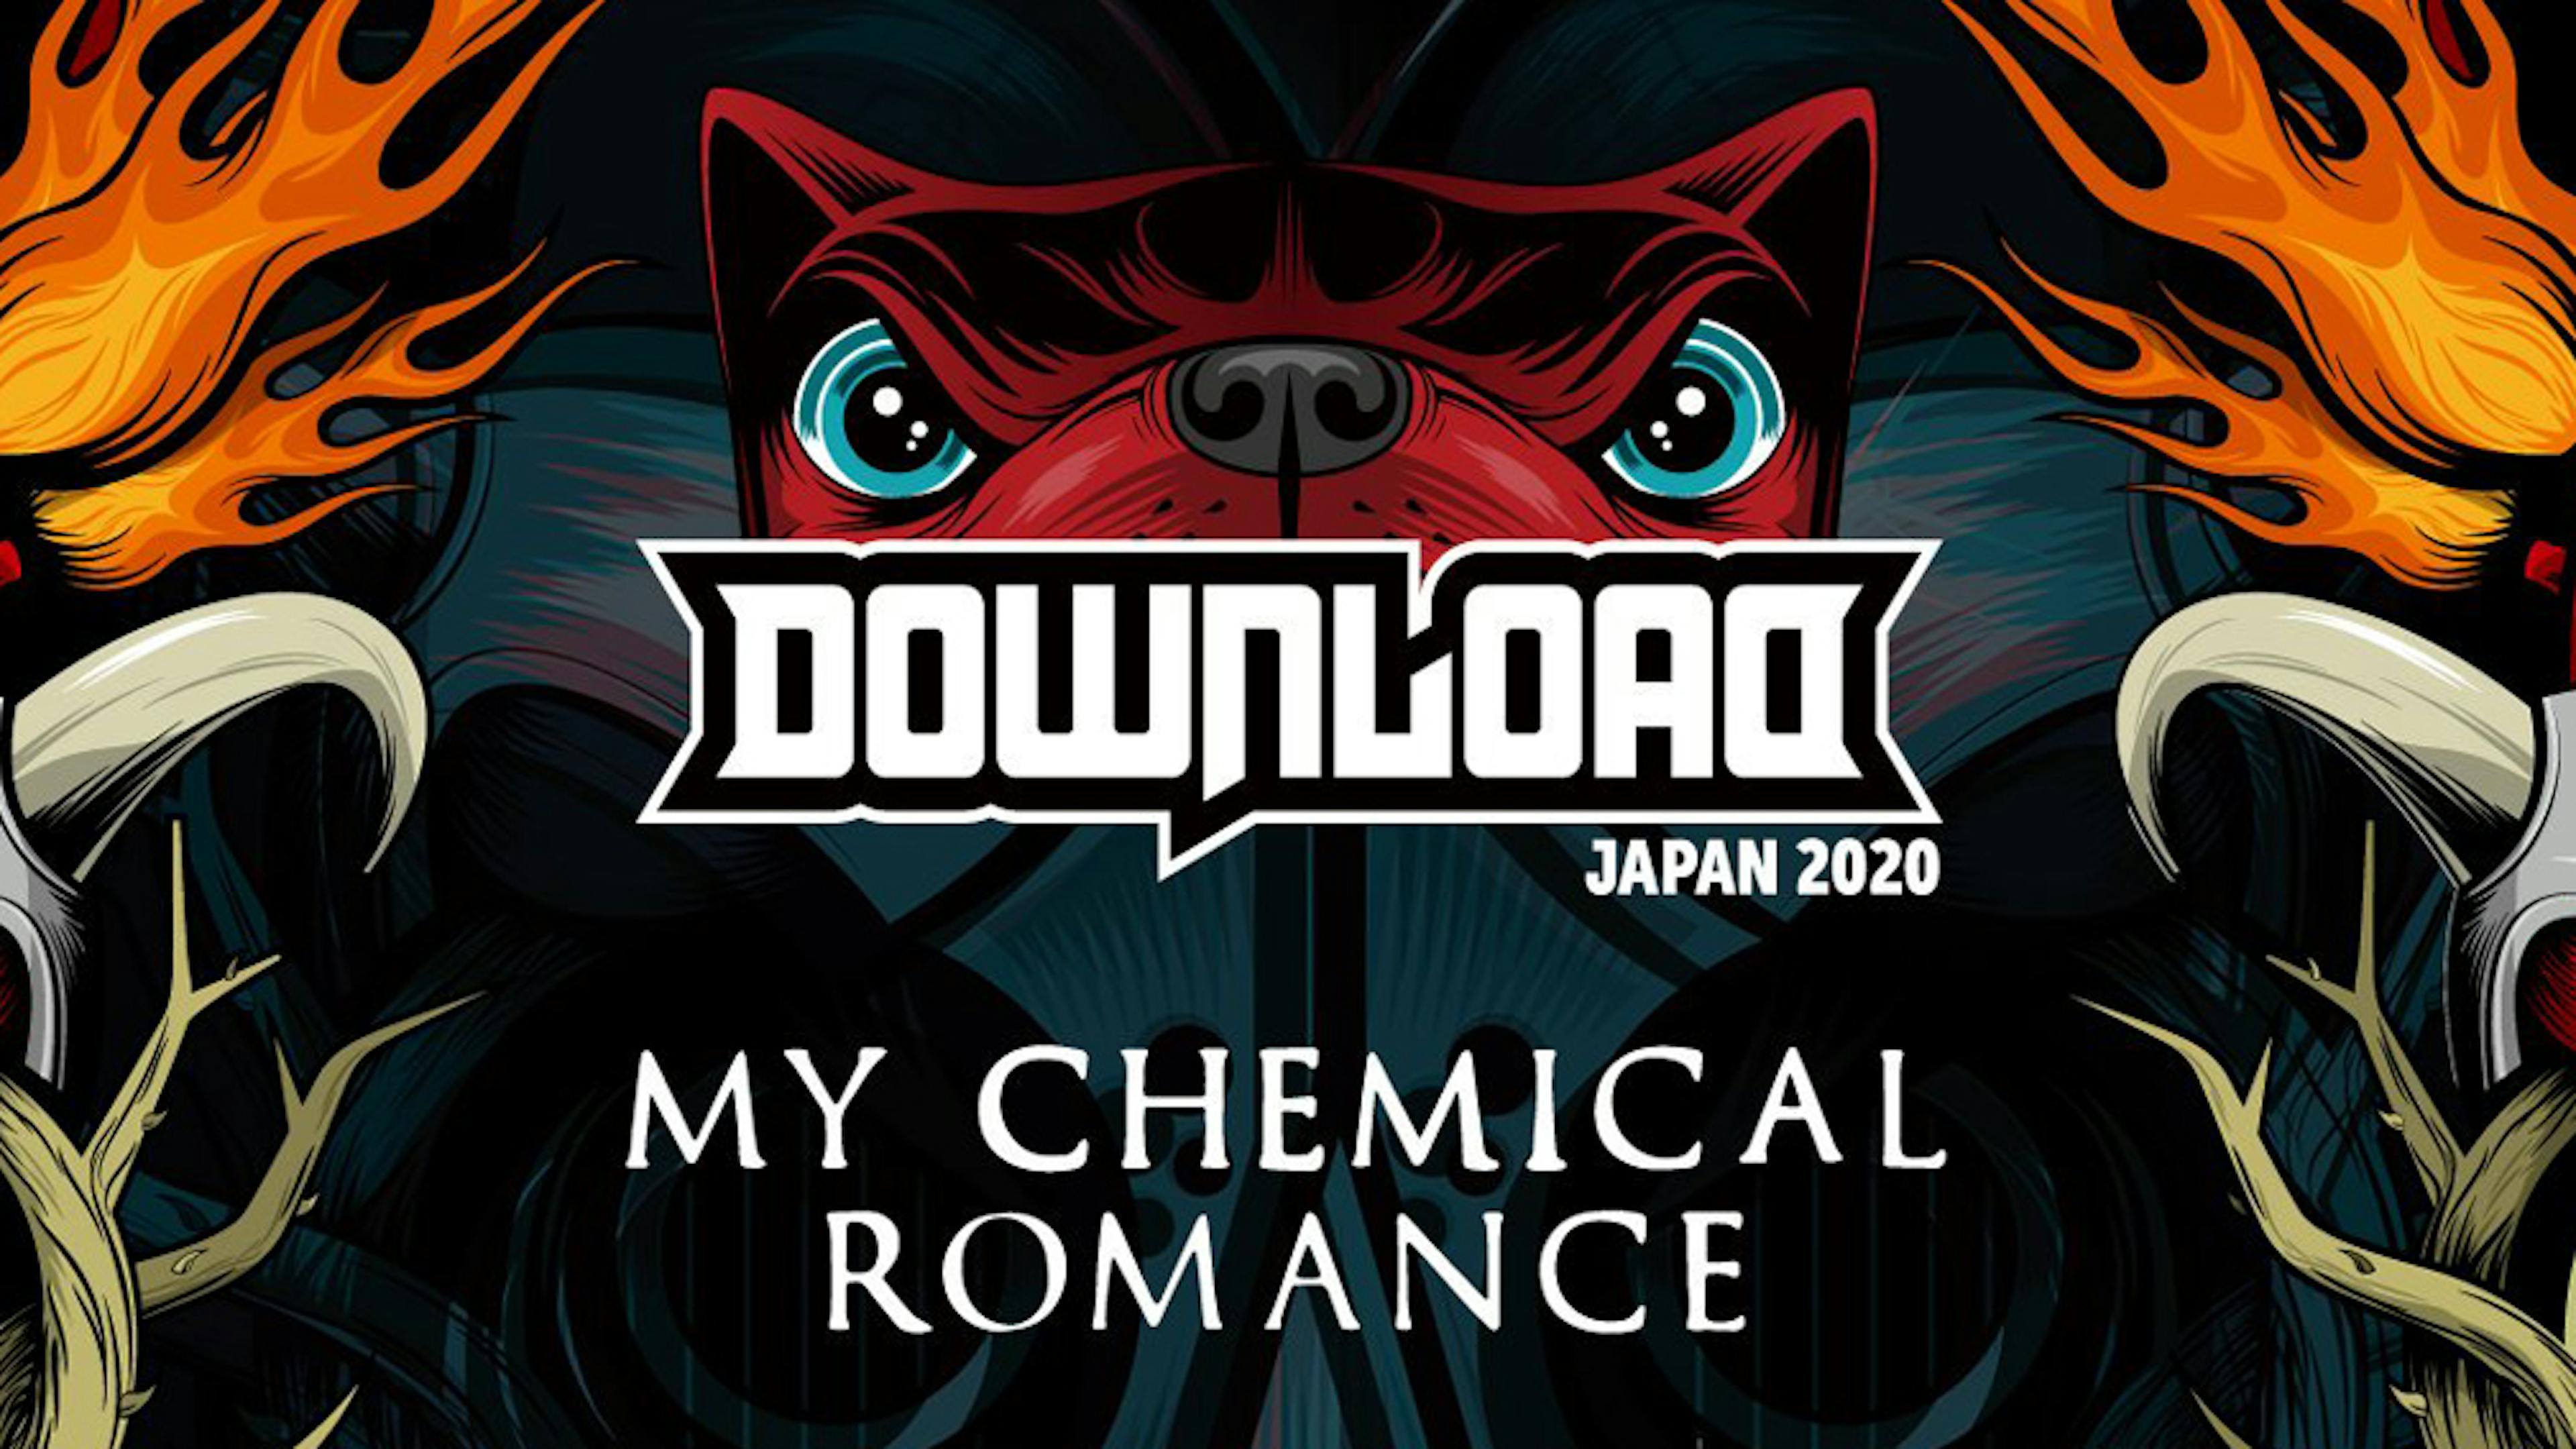 My Chemical Romance Are Headlining Download Festival Japan Kerrang!